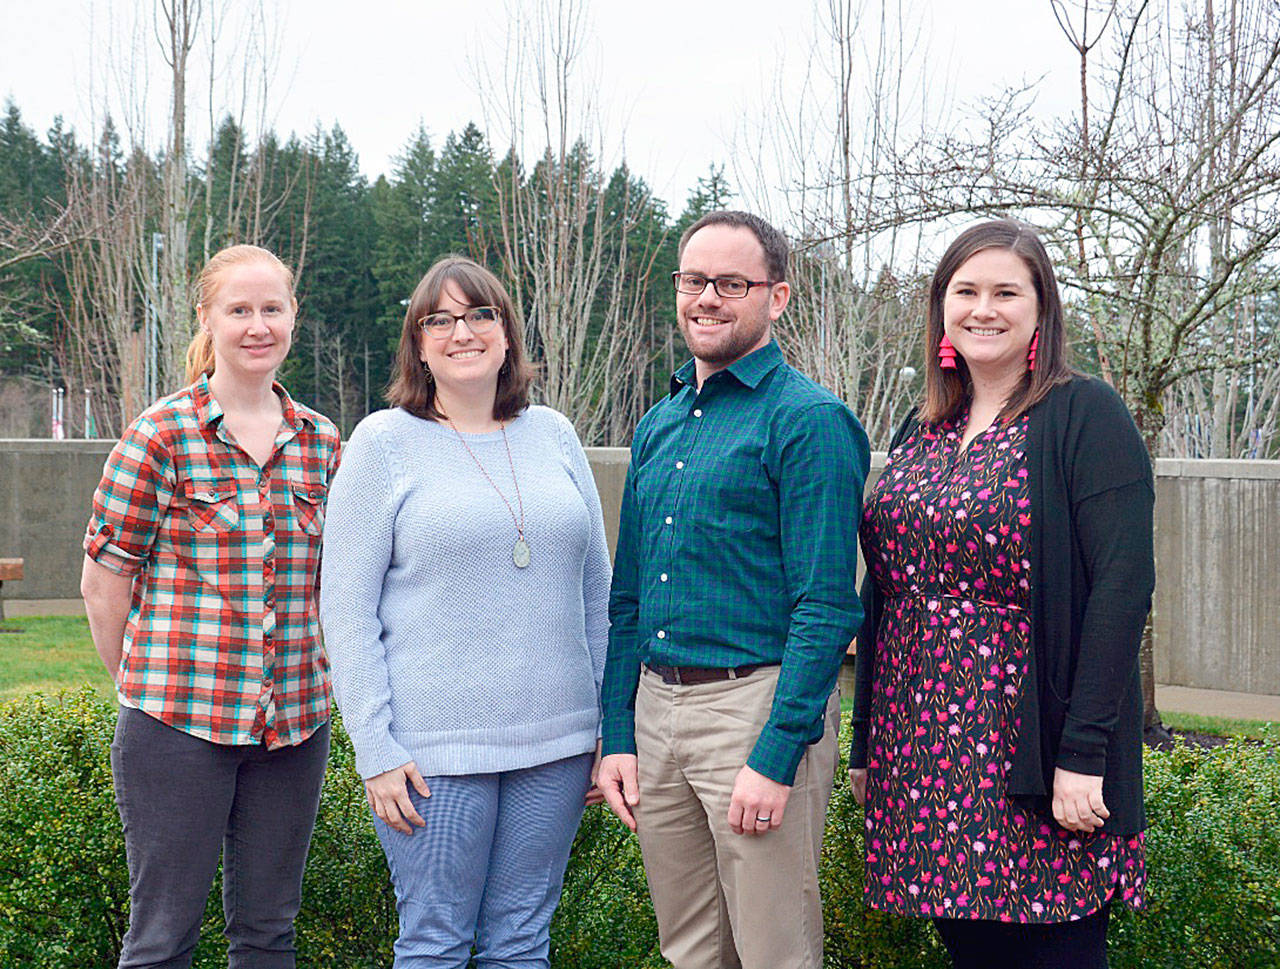 From left, Tara Martin, Lisa Snow, Jeff LaBelle and Jessica Rice completed the process of earning National Board Certification. The National Board Certified Teachers teach at Eastside Catholic School in Sammamish. Photo courtesy of Eastside Catholic School